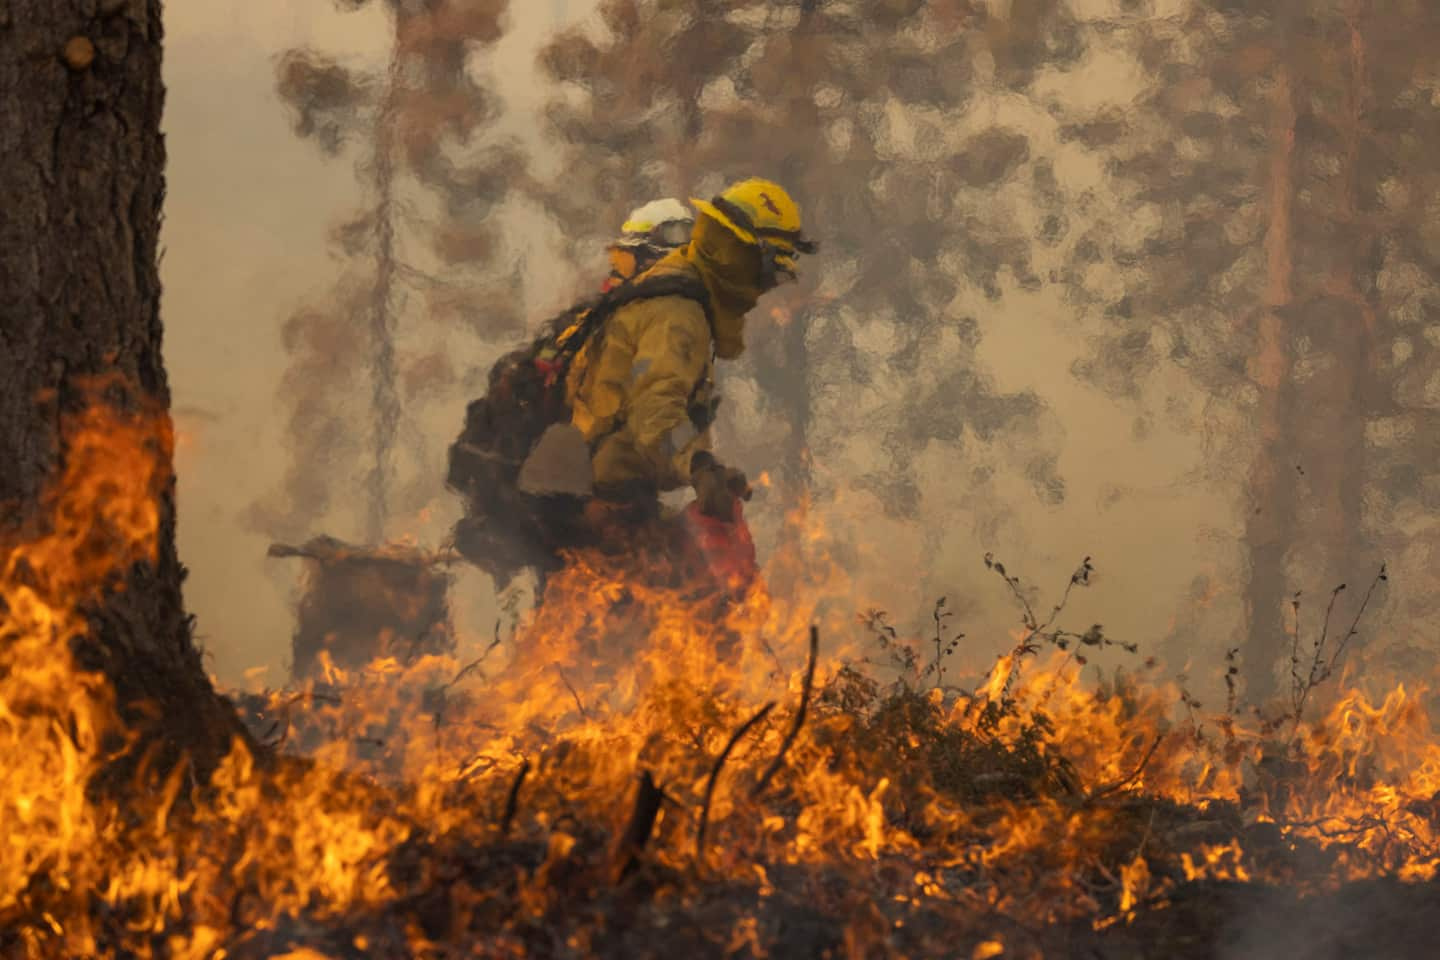 A giant fire continues to rage in California